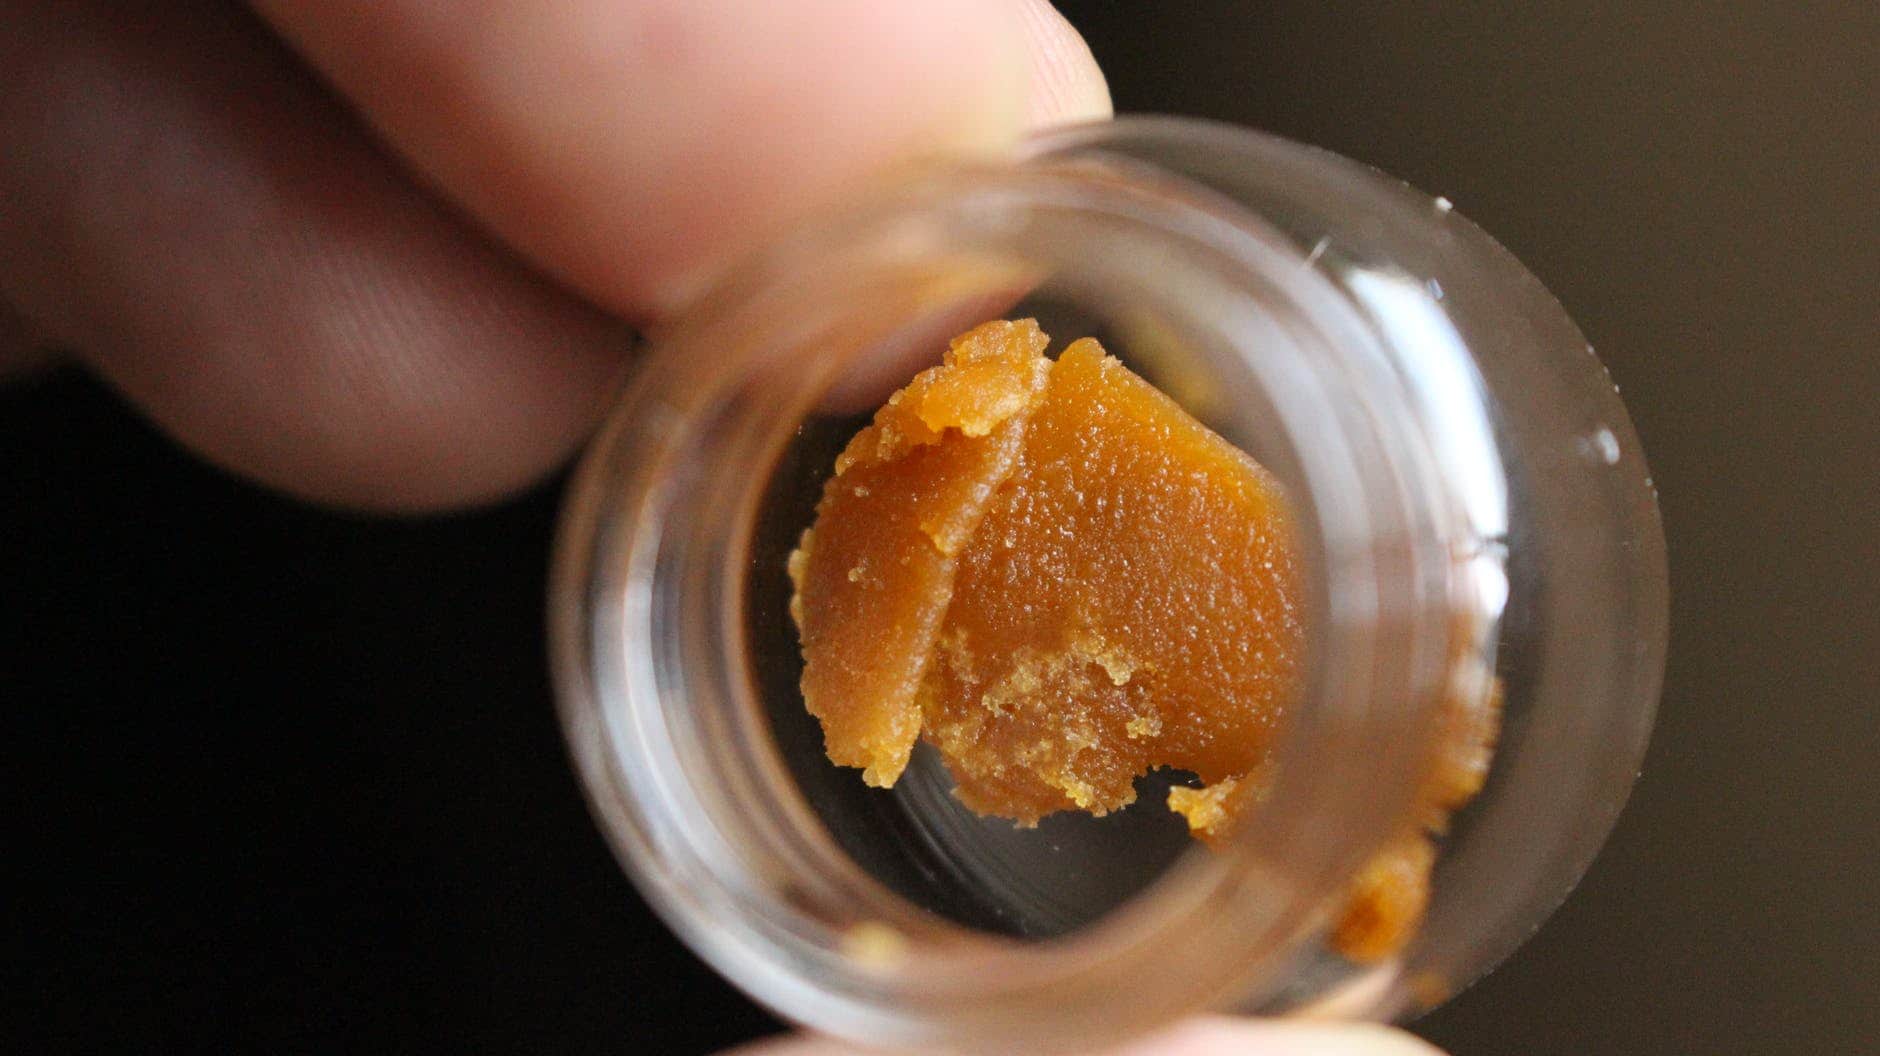 what are concentrates?